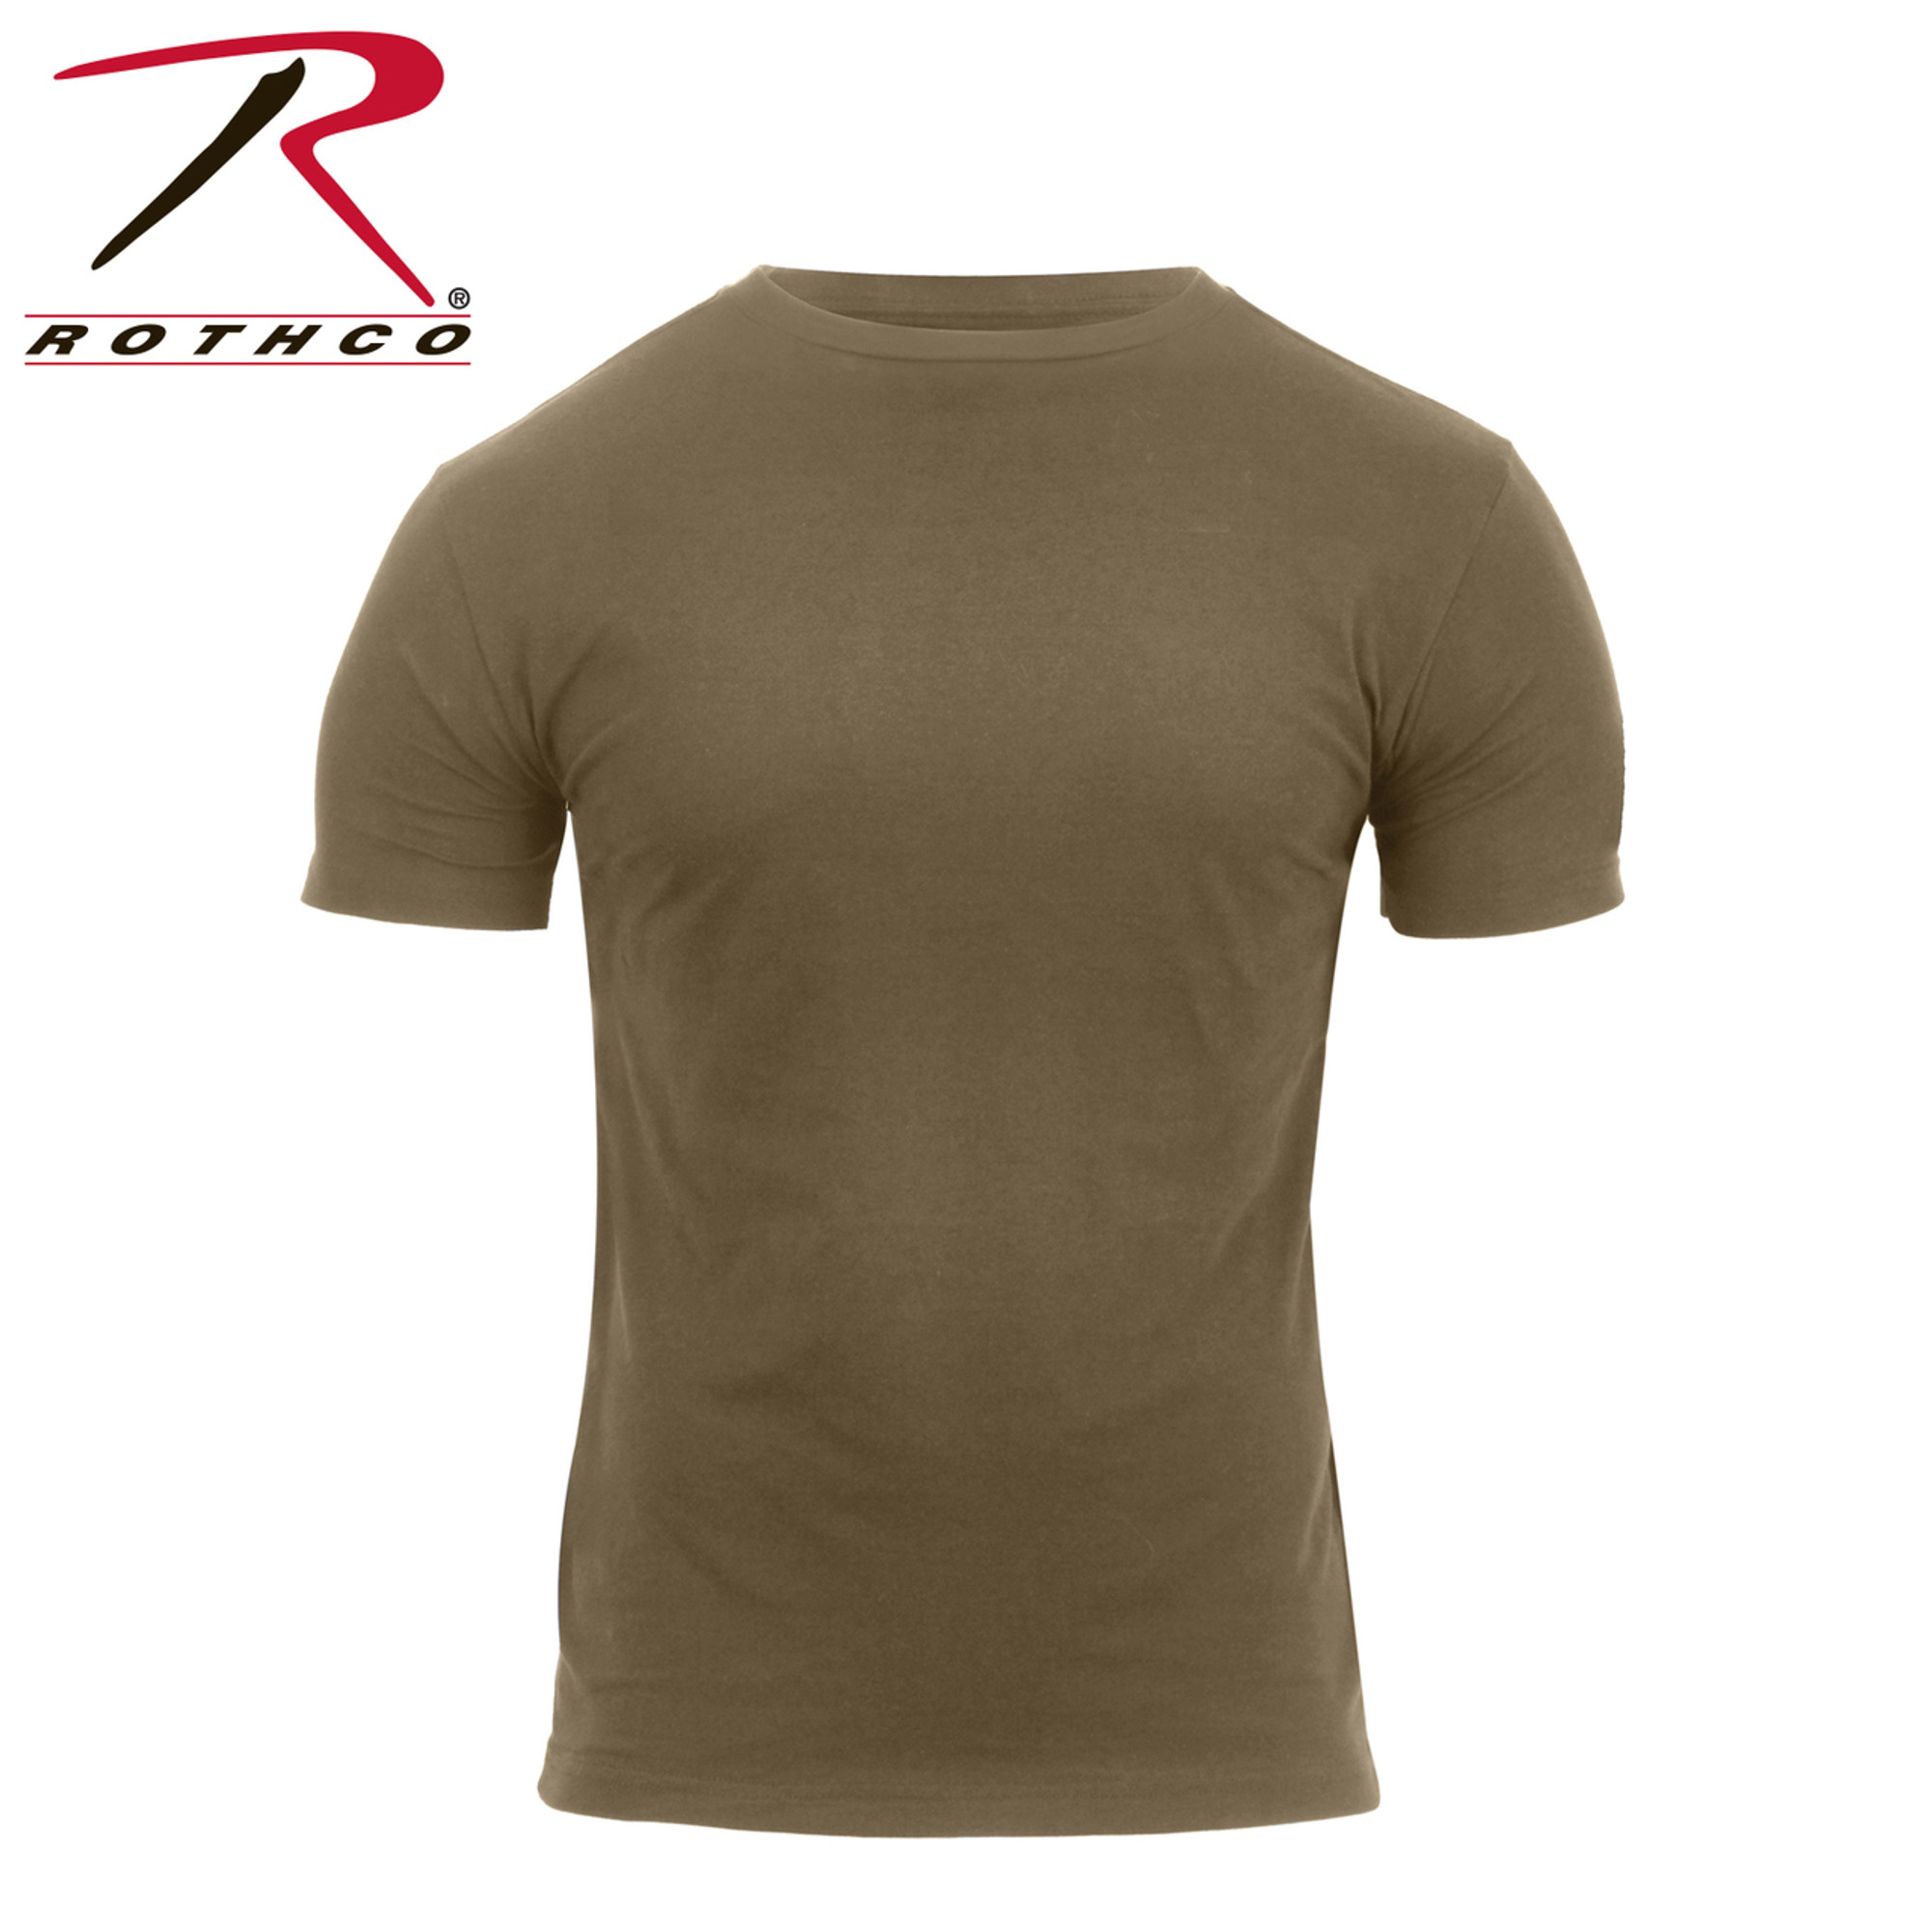 Rothco Athletic Fit Solid Color Military T-Shirt - AR 670-1 Coyote Brown	